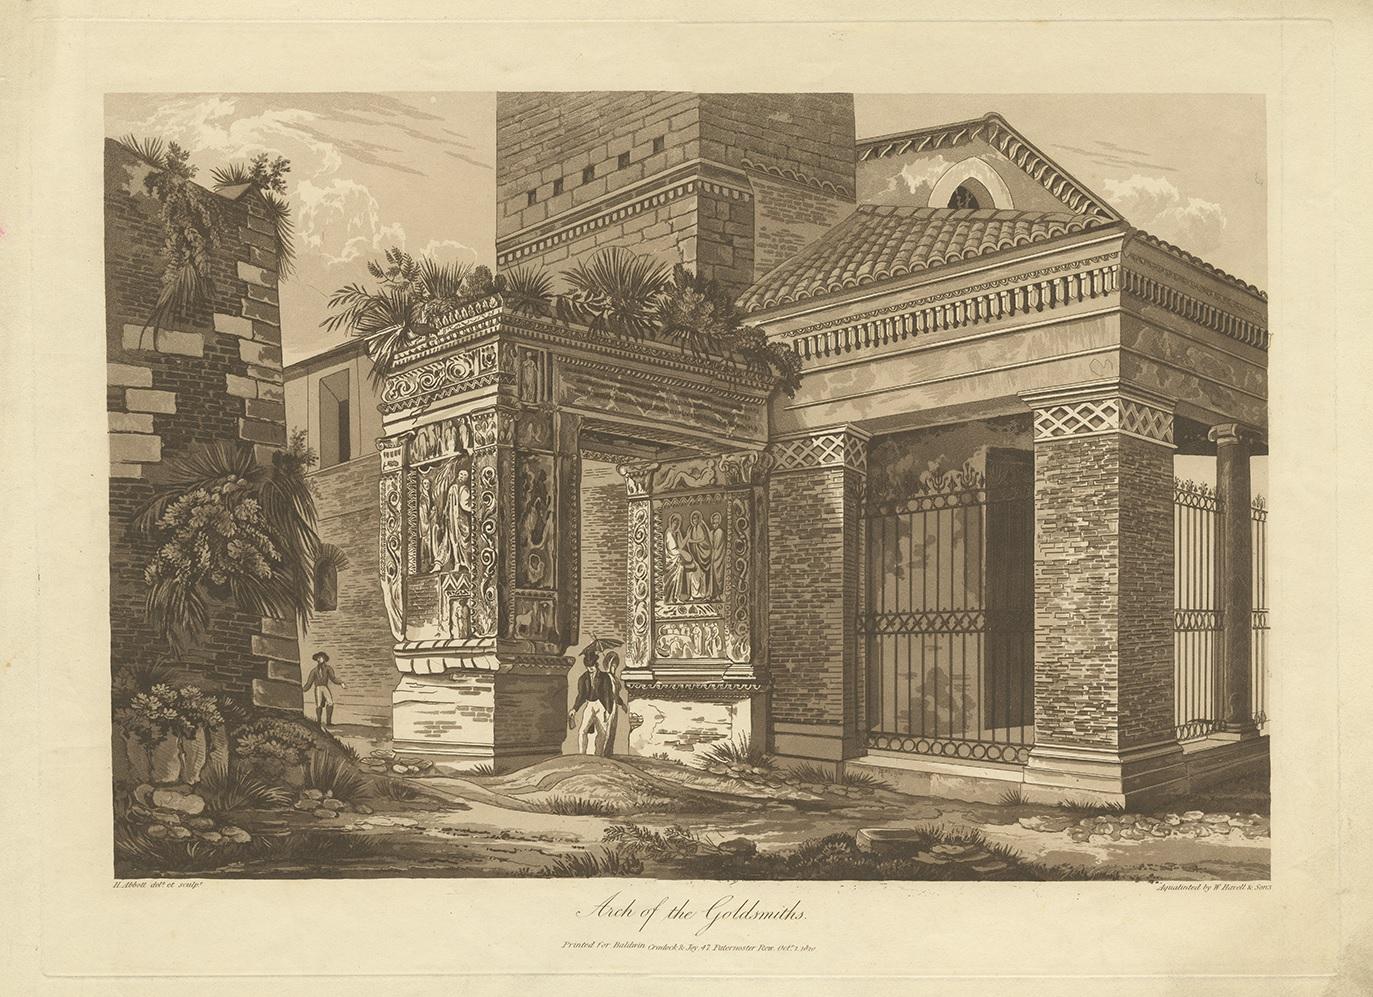 Antique print titled 'Arch of the Goldsmiths'. Large aquatint of the Arch of the Goldsmith. The Goldsmith's gate, or arch of the goldsmith, was built by bankers and cattle merchants in A.D. 204 in honor of Septimius Severus and his family, the